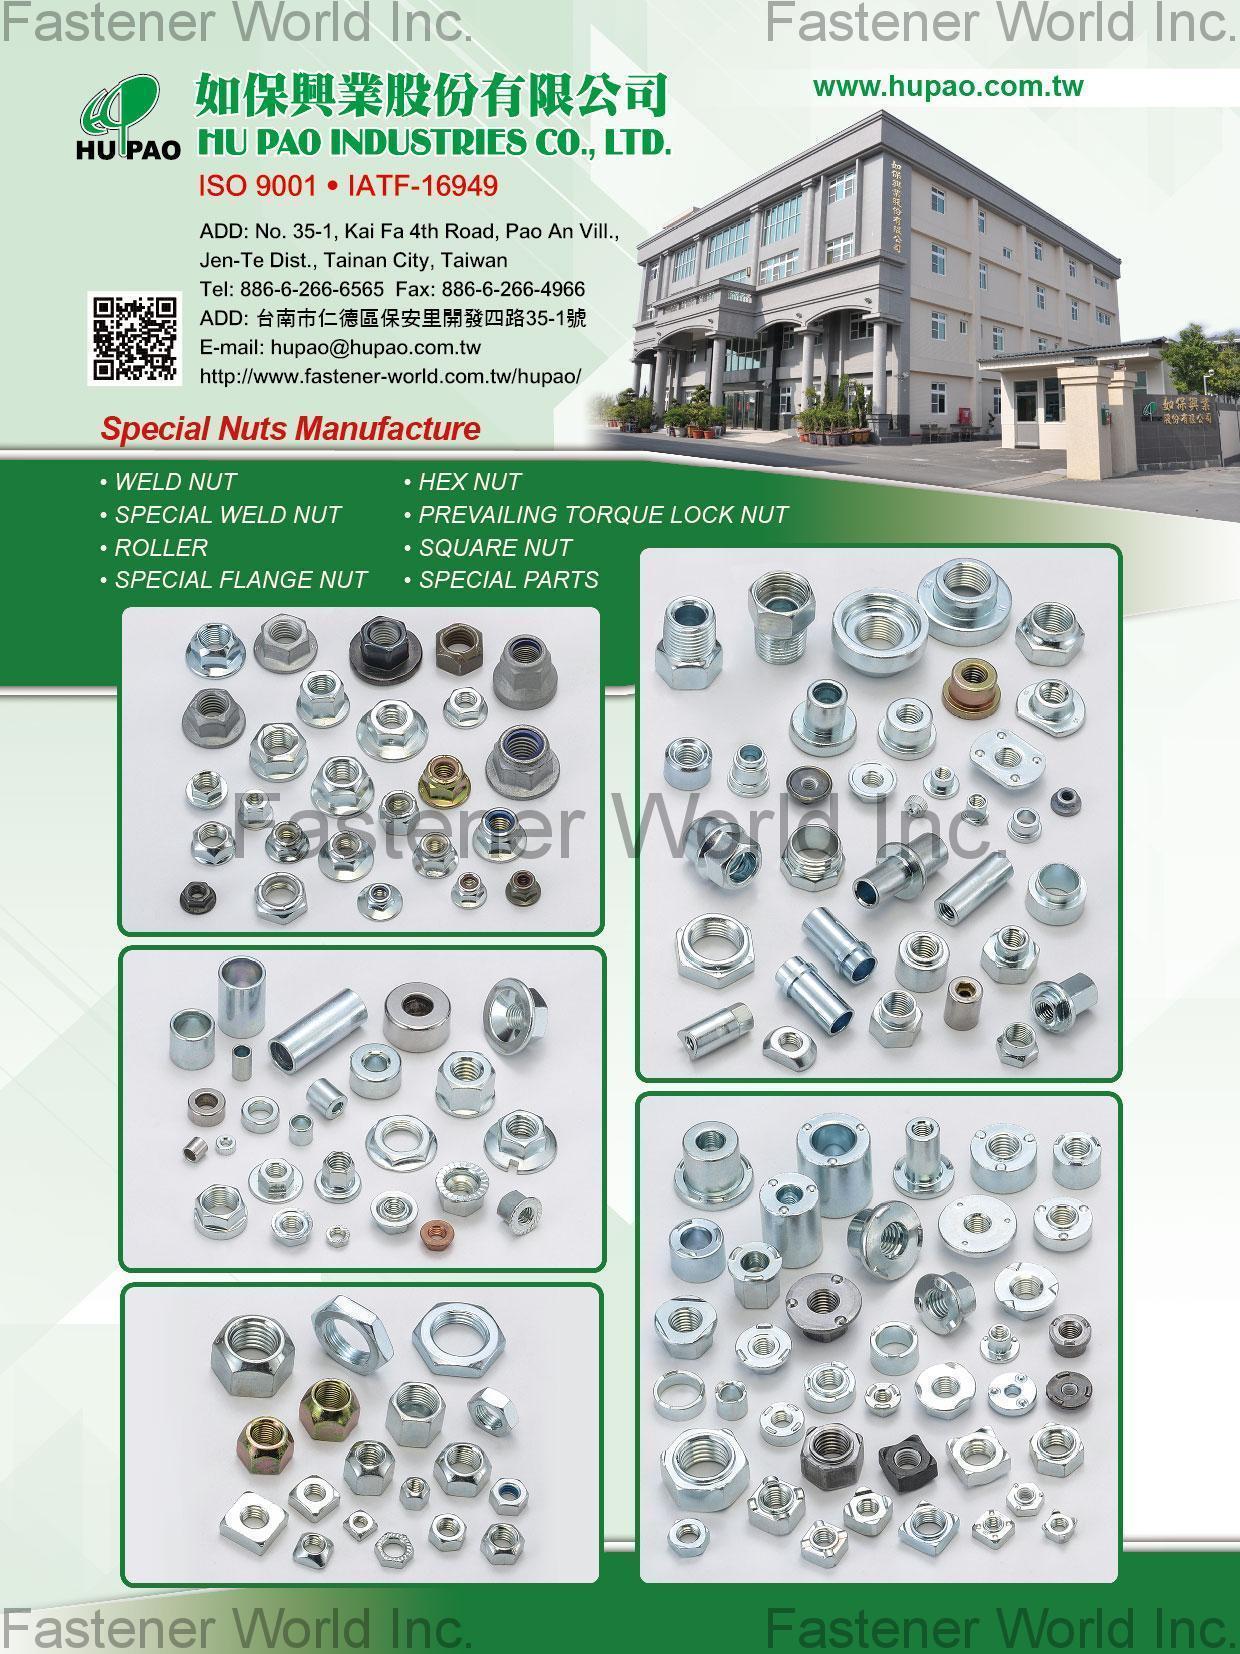 HU PAO INDUSTRIES CO., LTD.  , Weld Nuts, Special Weld Nuts, Roller, Special Flange Nuts, Hex Nuts, Prevailing Torque Lock Nuts, Square Nut, Special Parts , Special Parts